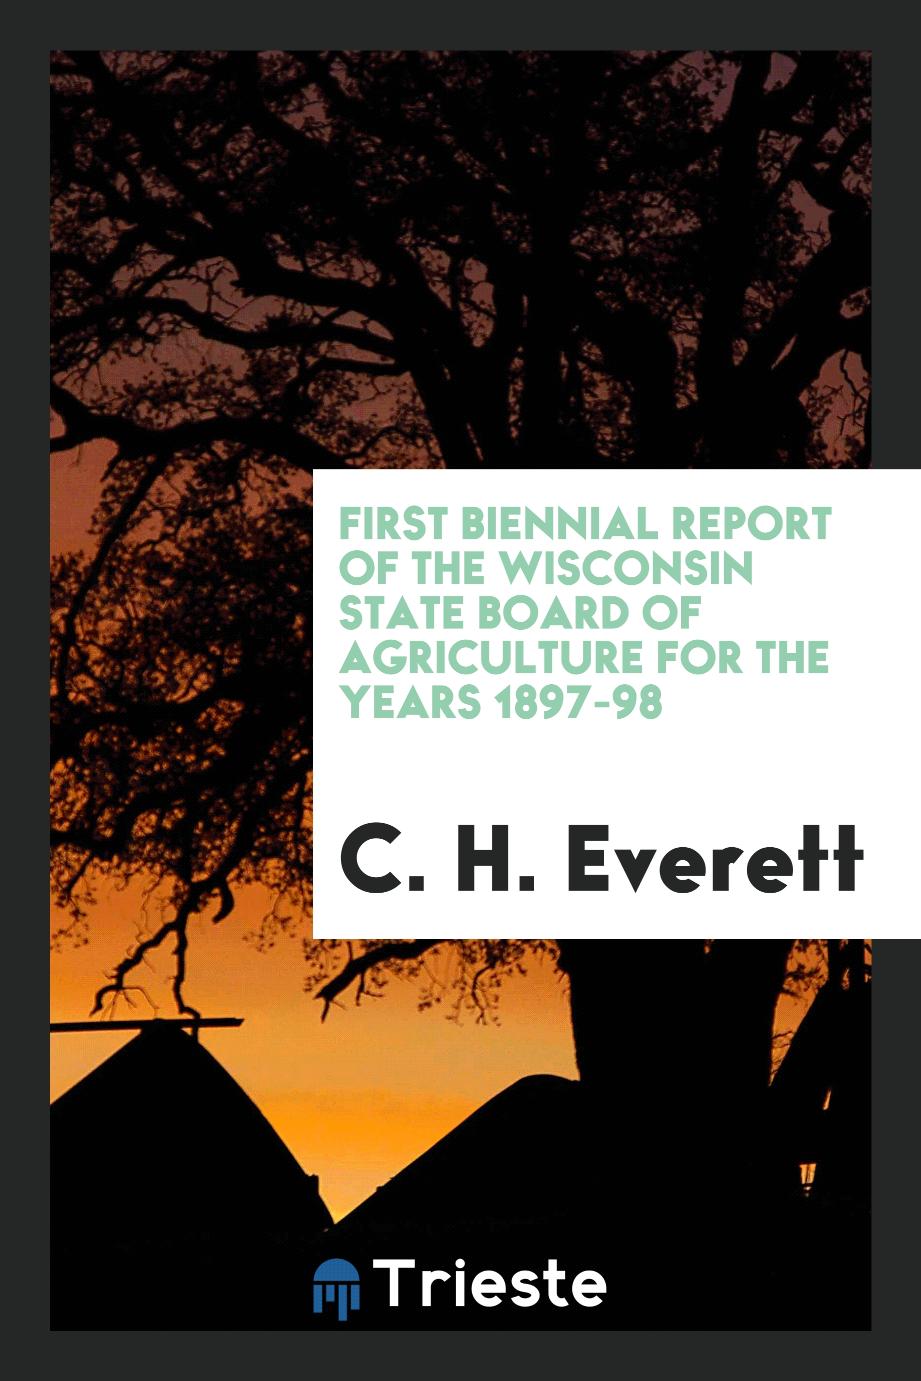 First Biennial Report of the Wisconsin State Board of Agriculture for the years 1897-98